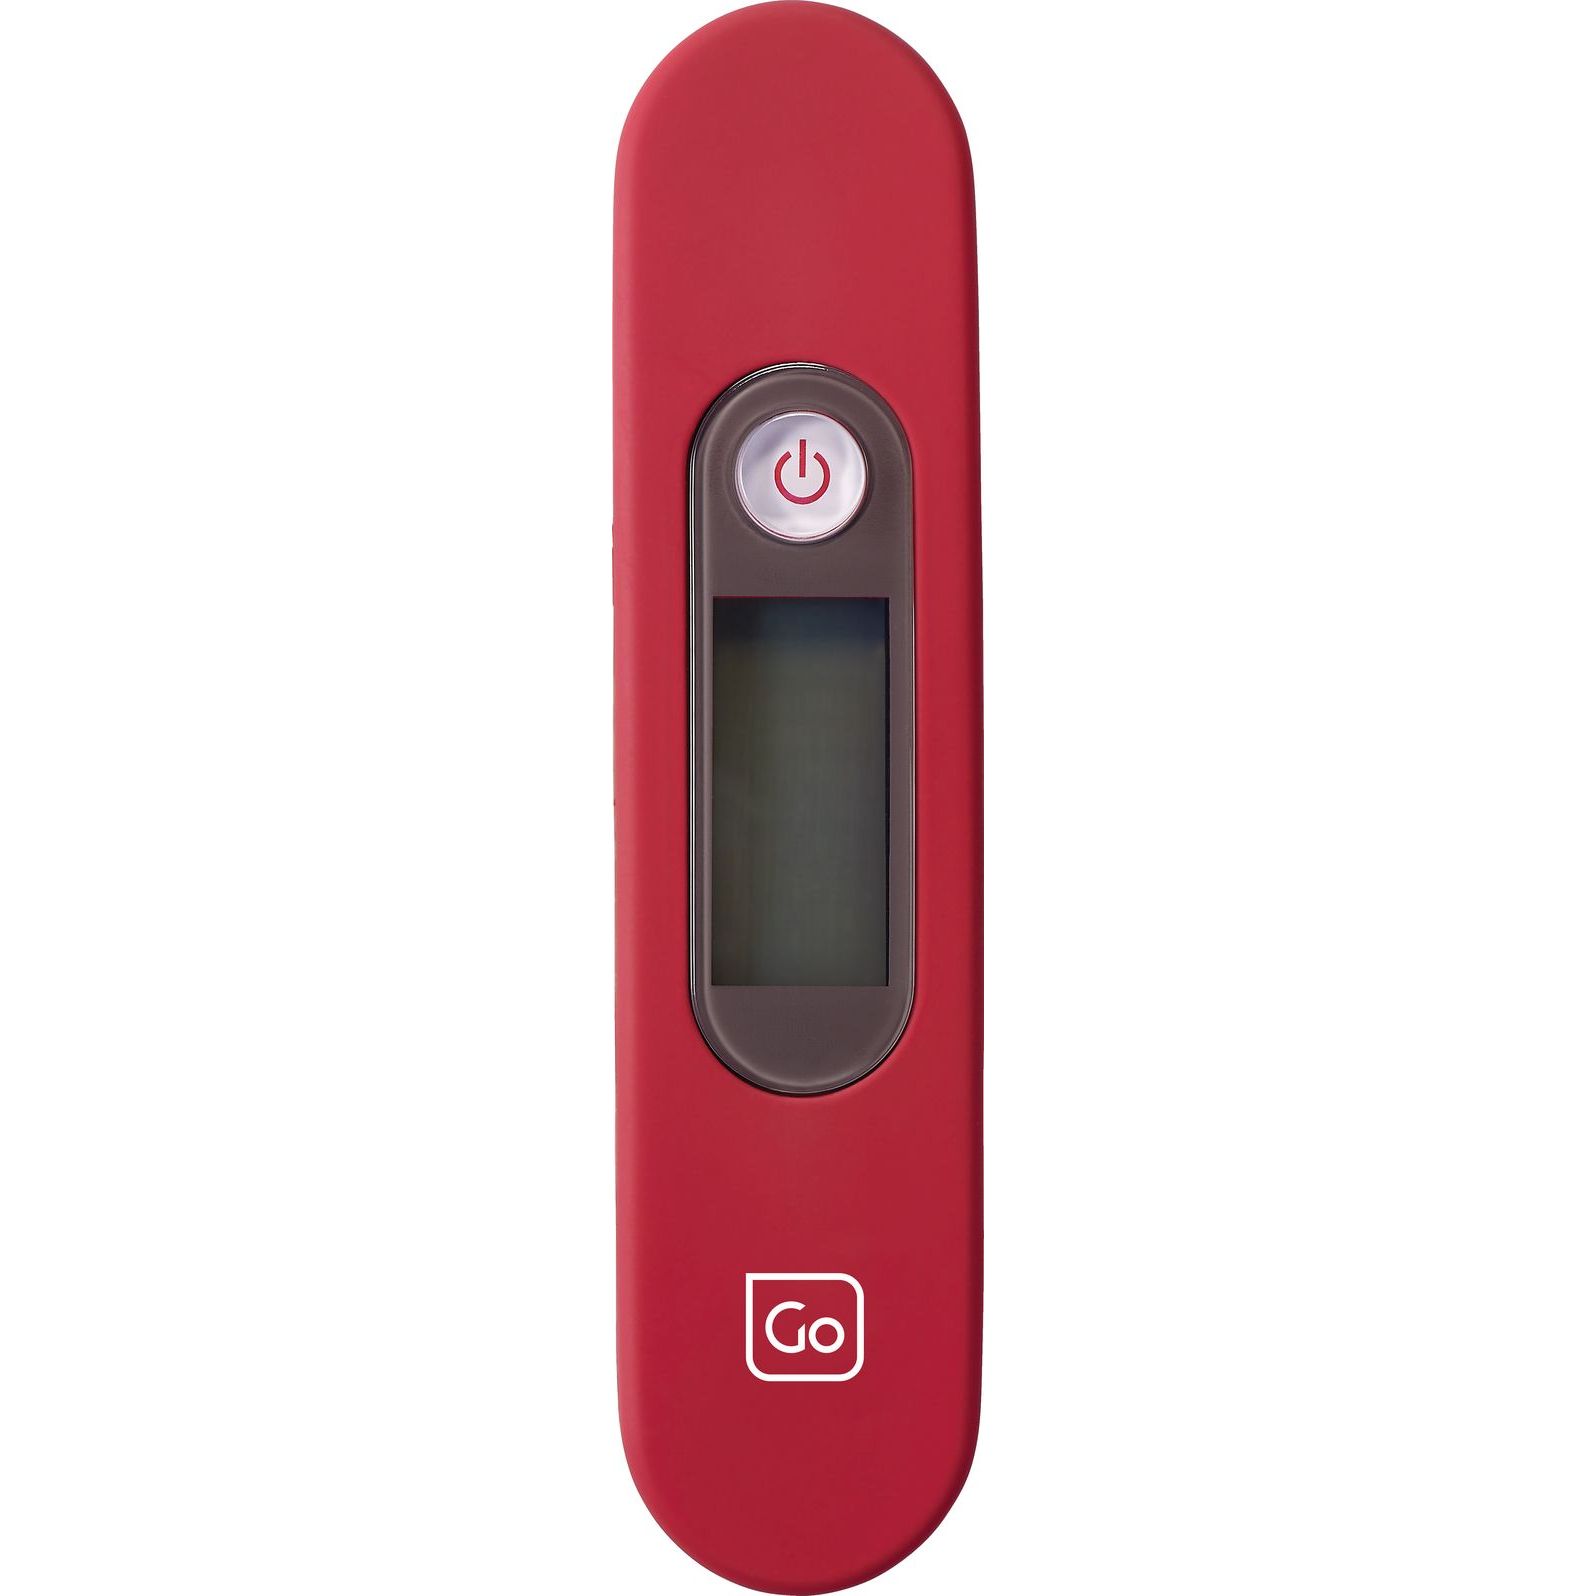 Luggage Scale, PS02, Dr.meter